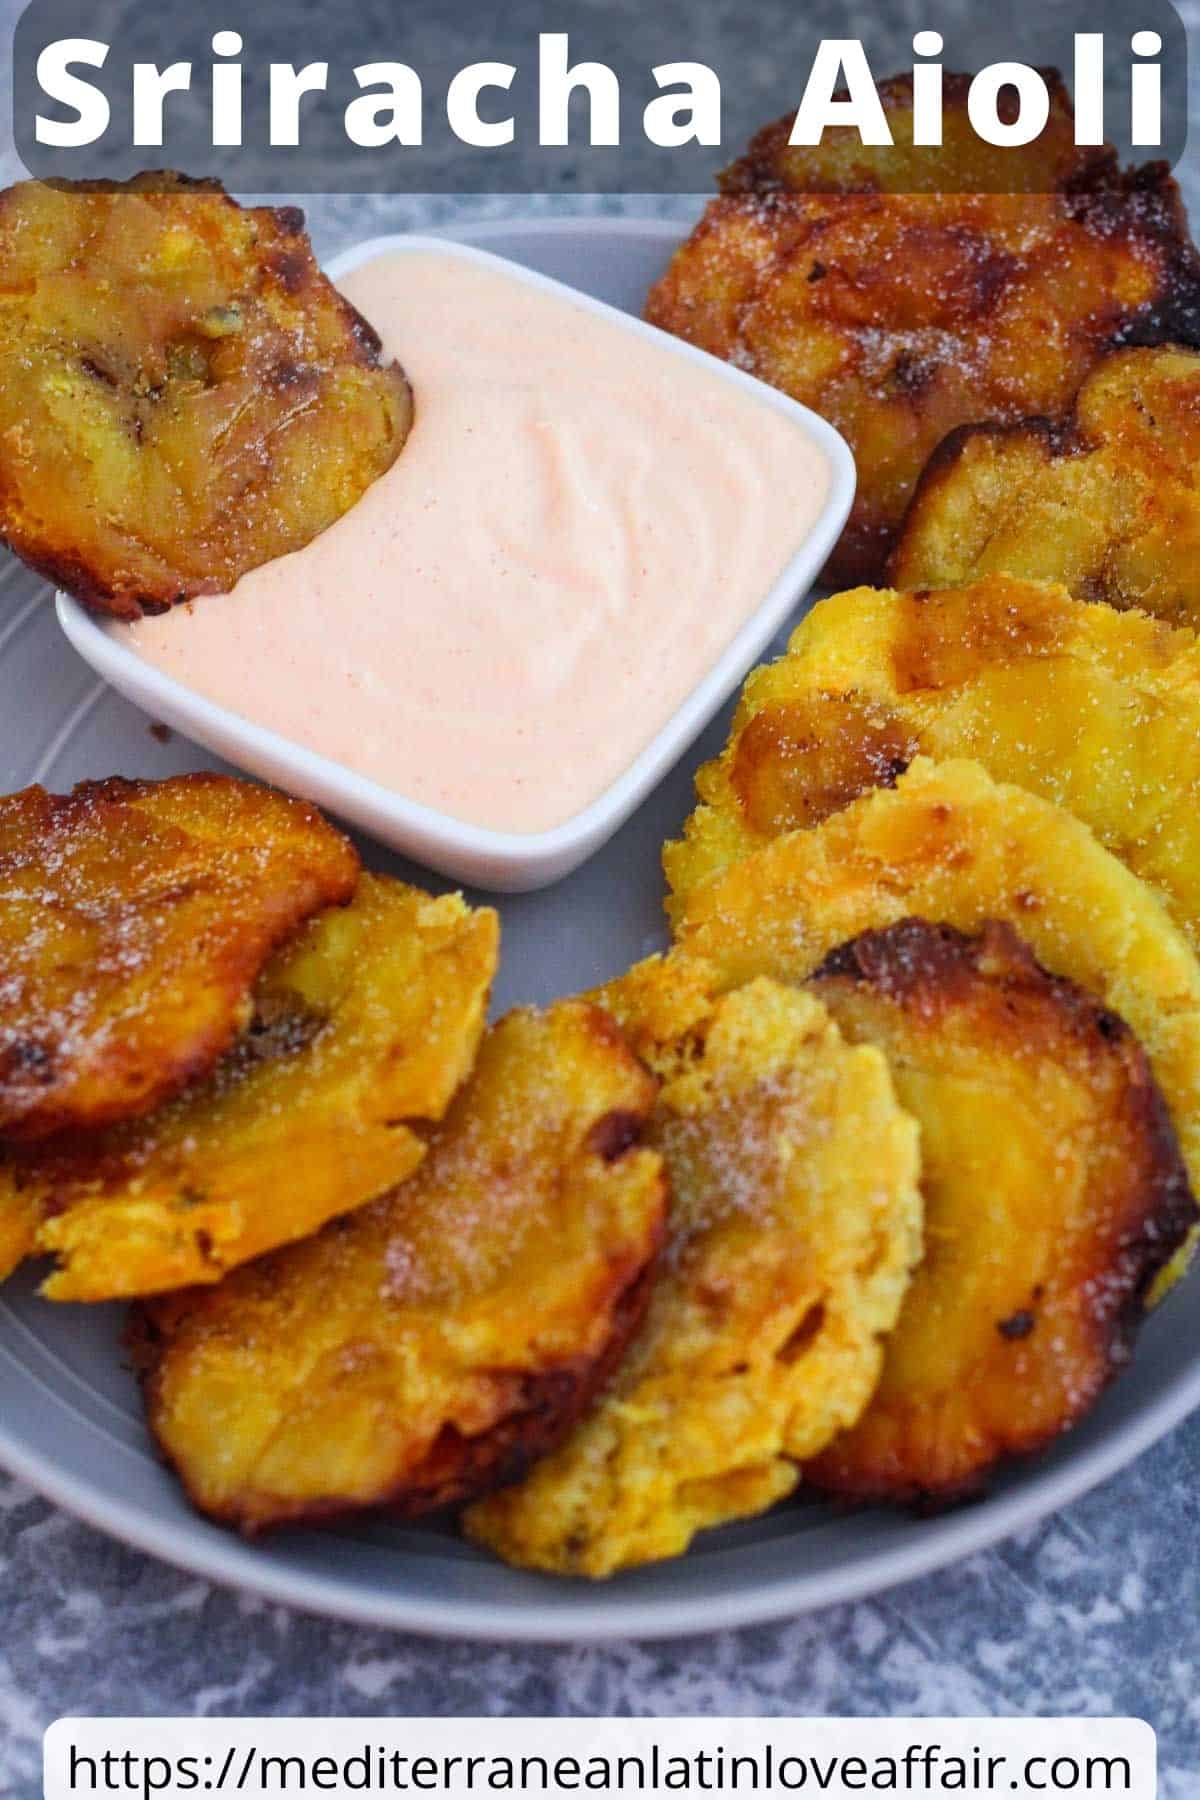 An image created for Pinterest, it shows a platter with fried tostones next to a square condiment bowl with sriracha aioli. Picture has a title bar on top and a website link at the bottom.